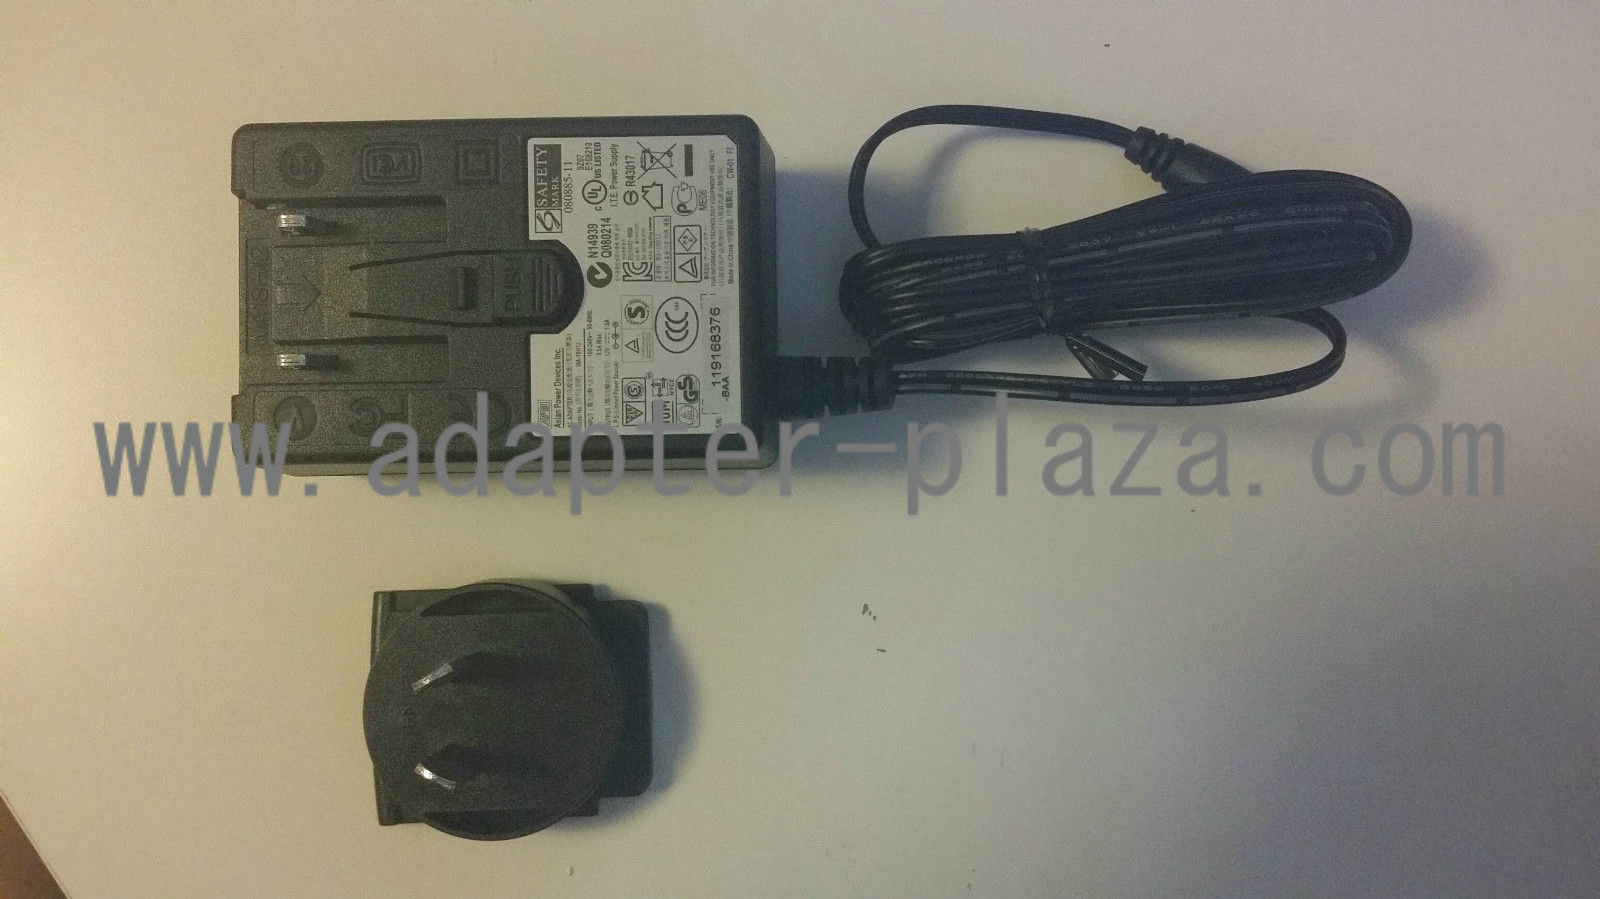 GENUINE APD WA-18H12 12V 1.5A AC ADAPTER for SEAGATE 3.5" EXTERNAL HARD DRIVE POWER SUPPLY 5.5*2.5MM